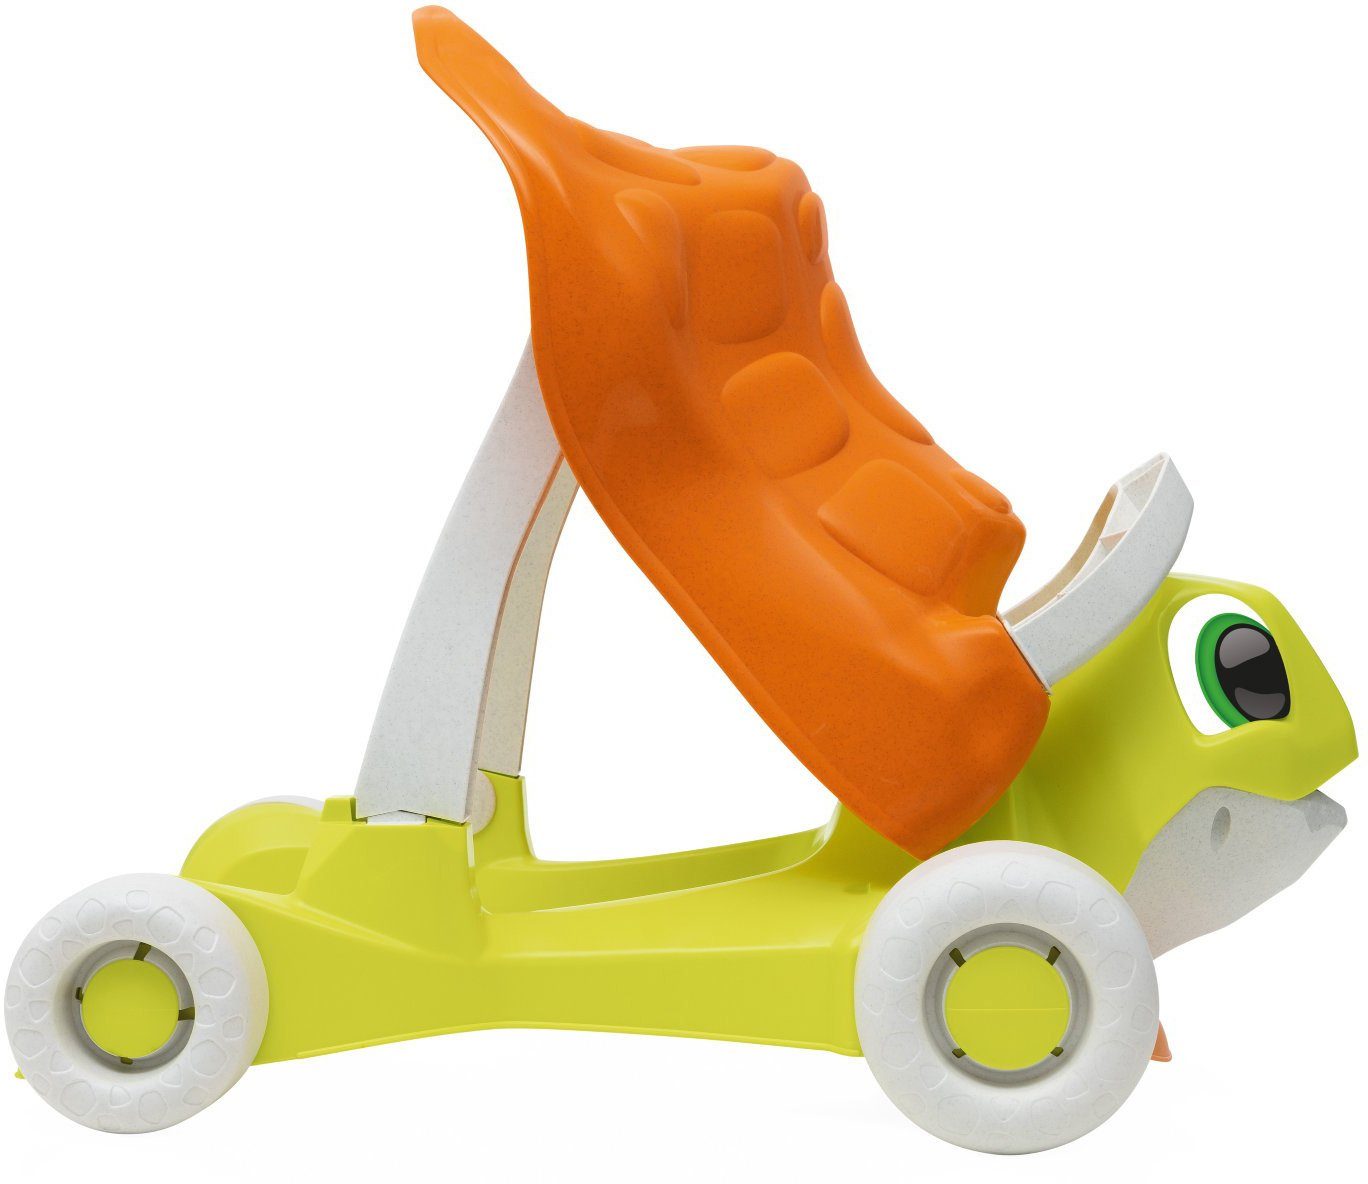 Chicco Lauflernhilfe Walk&Ride Turtle, teilweise aus recyceltem Made Europe in Material